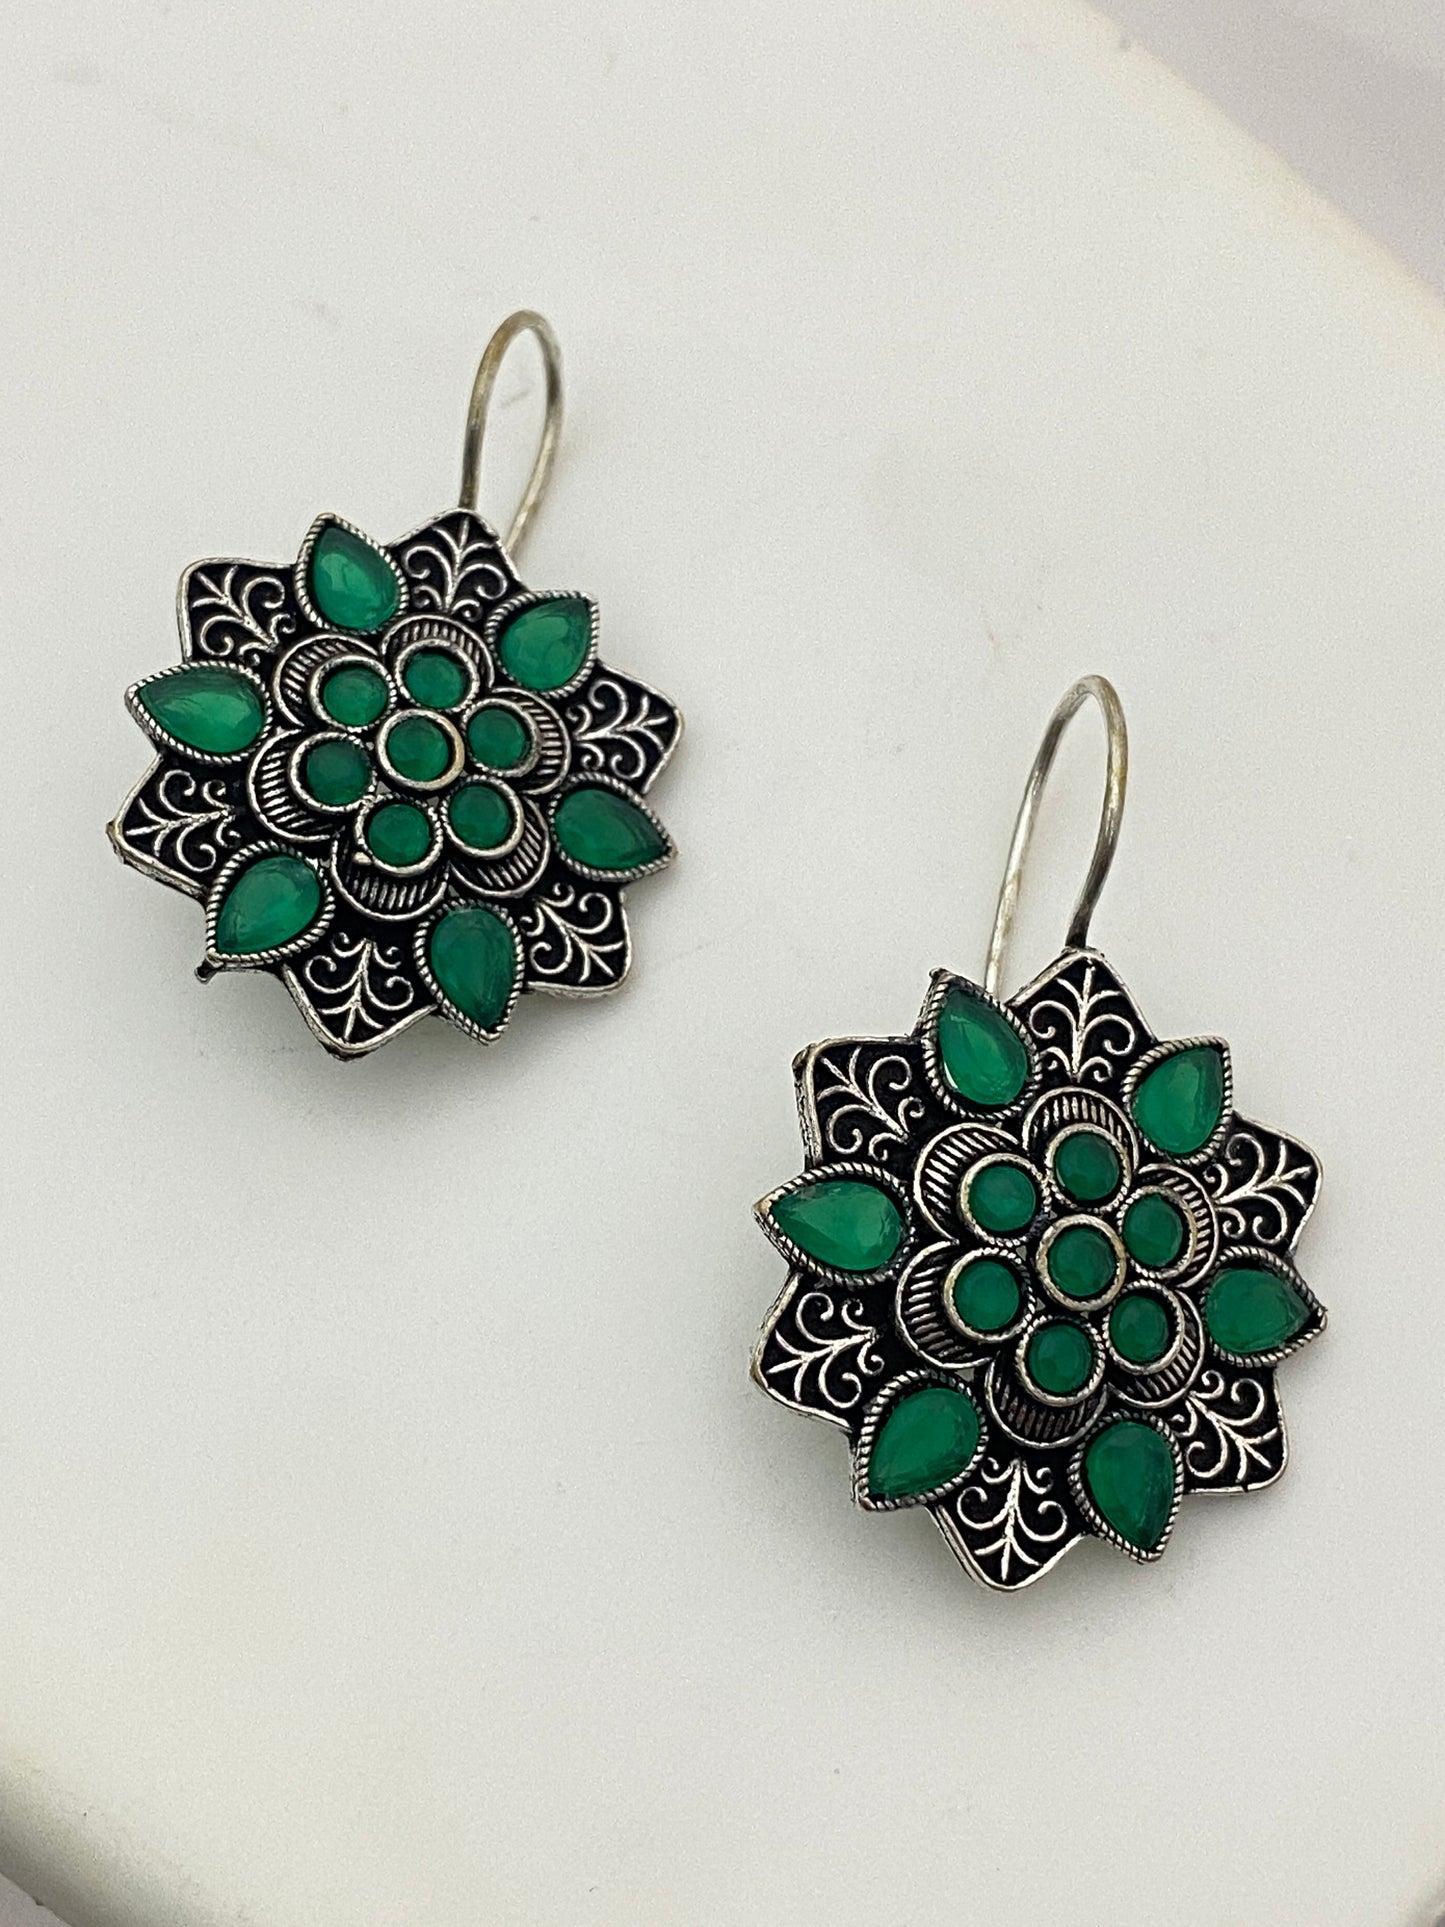 Gorgeous Green Color Rounded Floral Designer Oxidized Earrings In Peovia